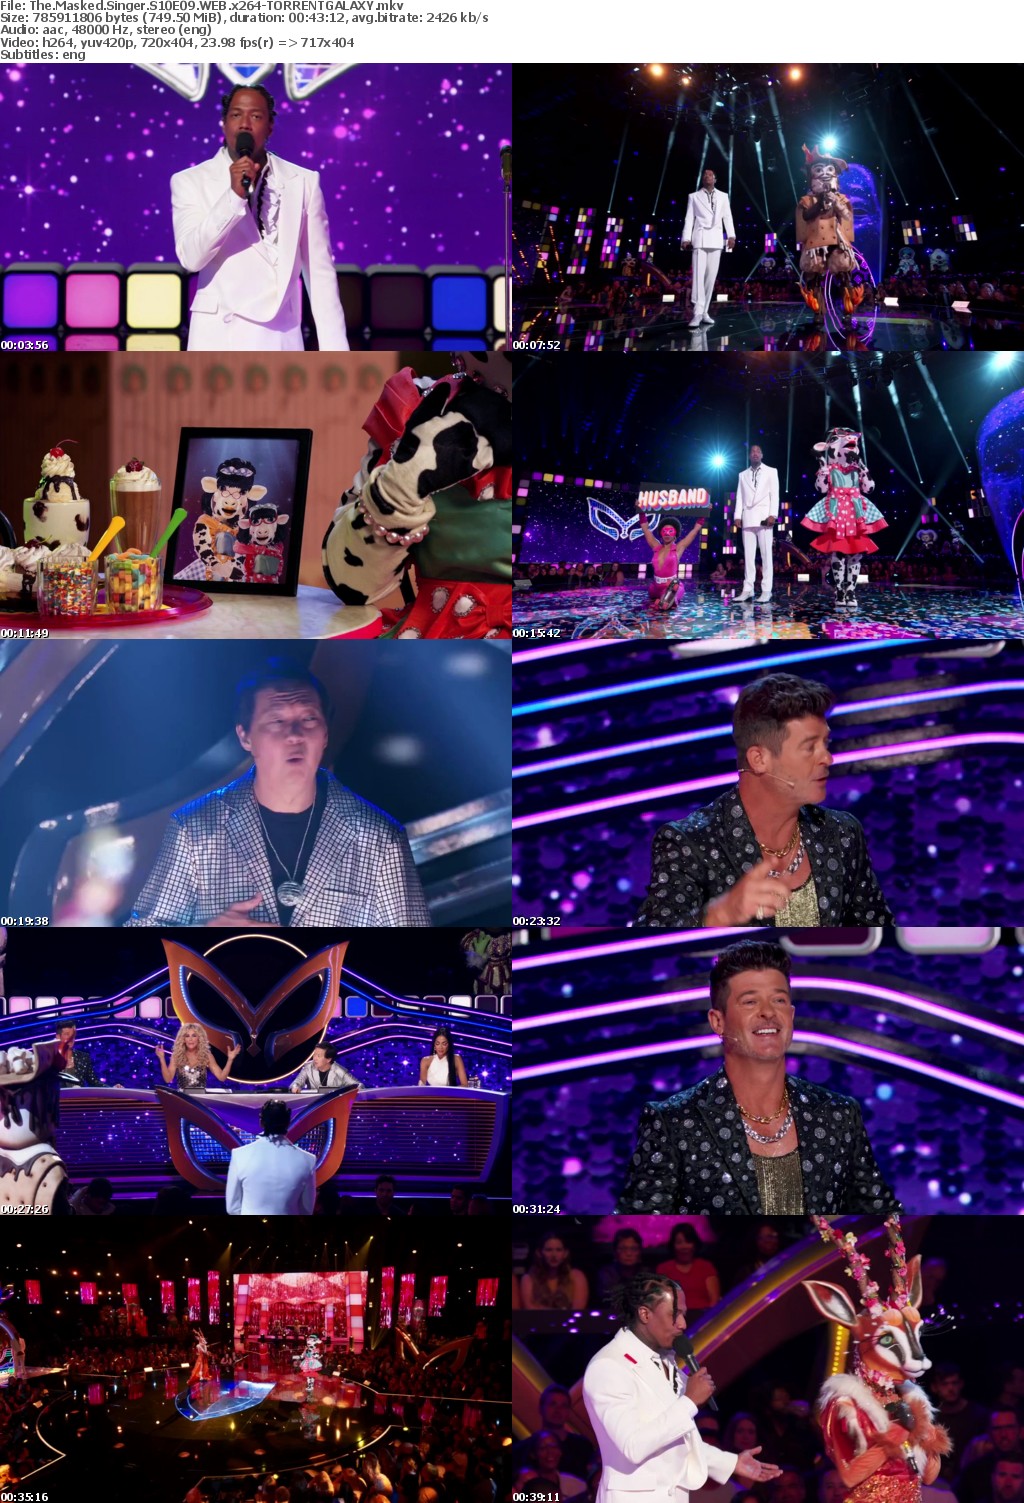 The Masked Singer S10E09 WEB x264-GALAXY